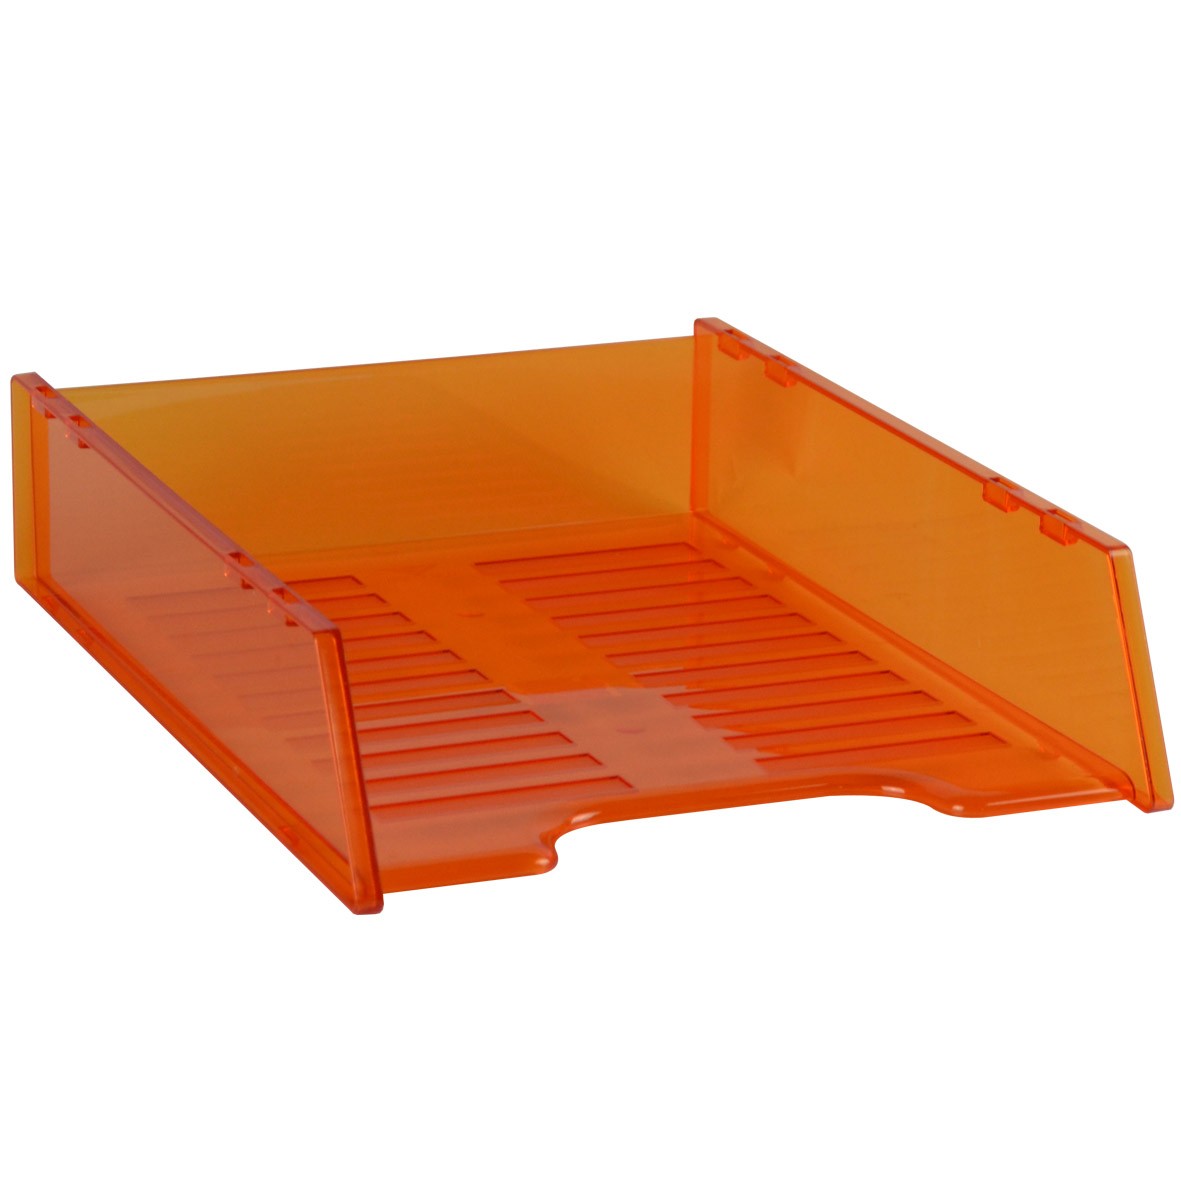 DOCUMENT TRAY STACKABLE TINTED ORANGE #I-60OR  